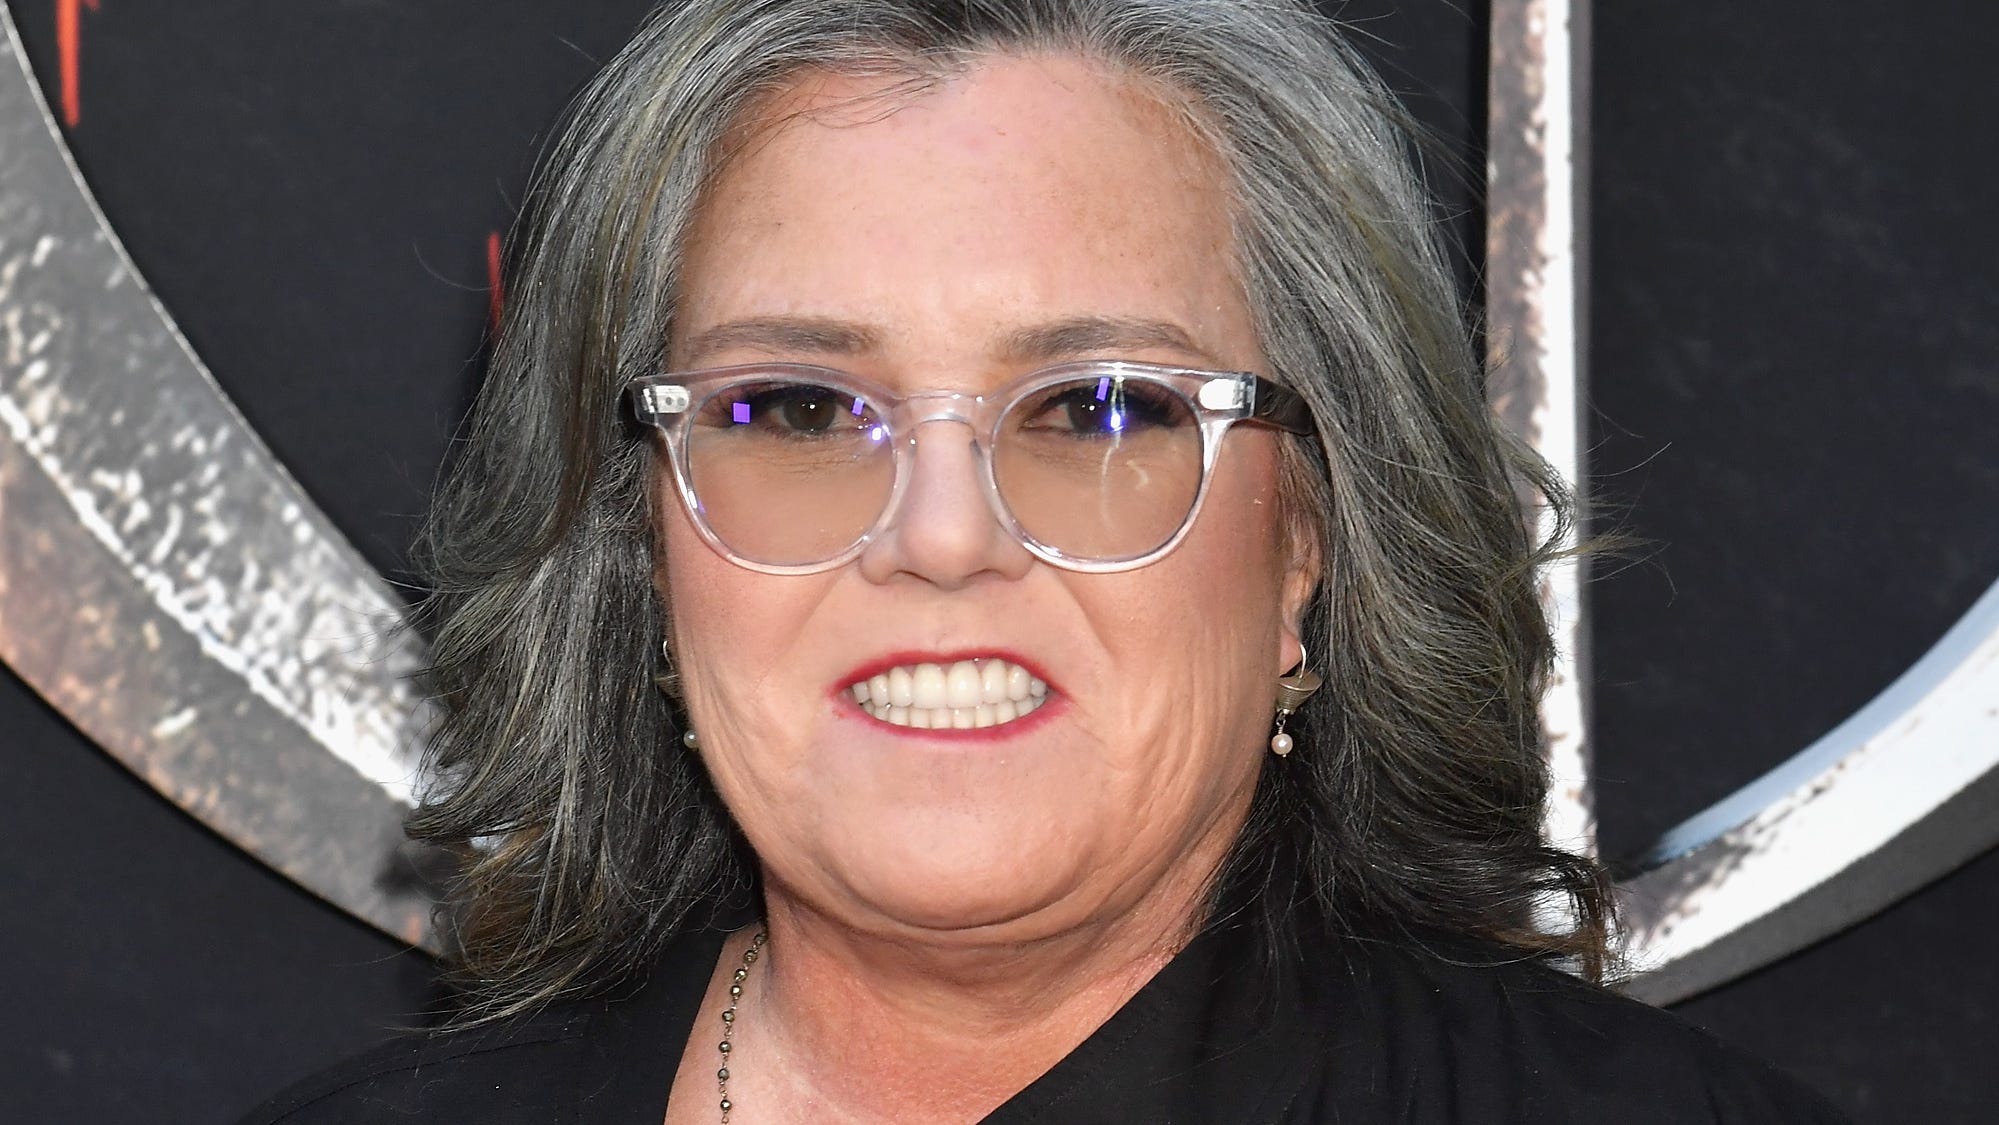 'Red Table Talk: The Estefans' exclusive: Rosie O'Donnell reveals she dated a man for 2 years - USA TODAY